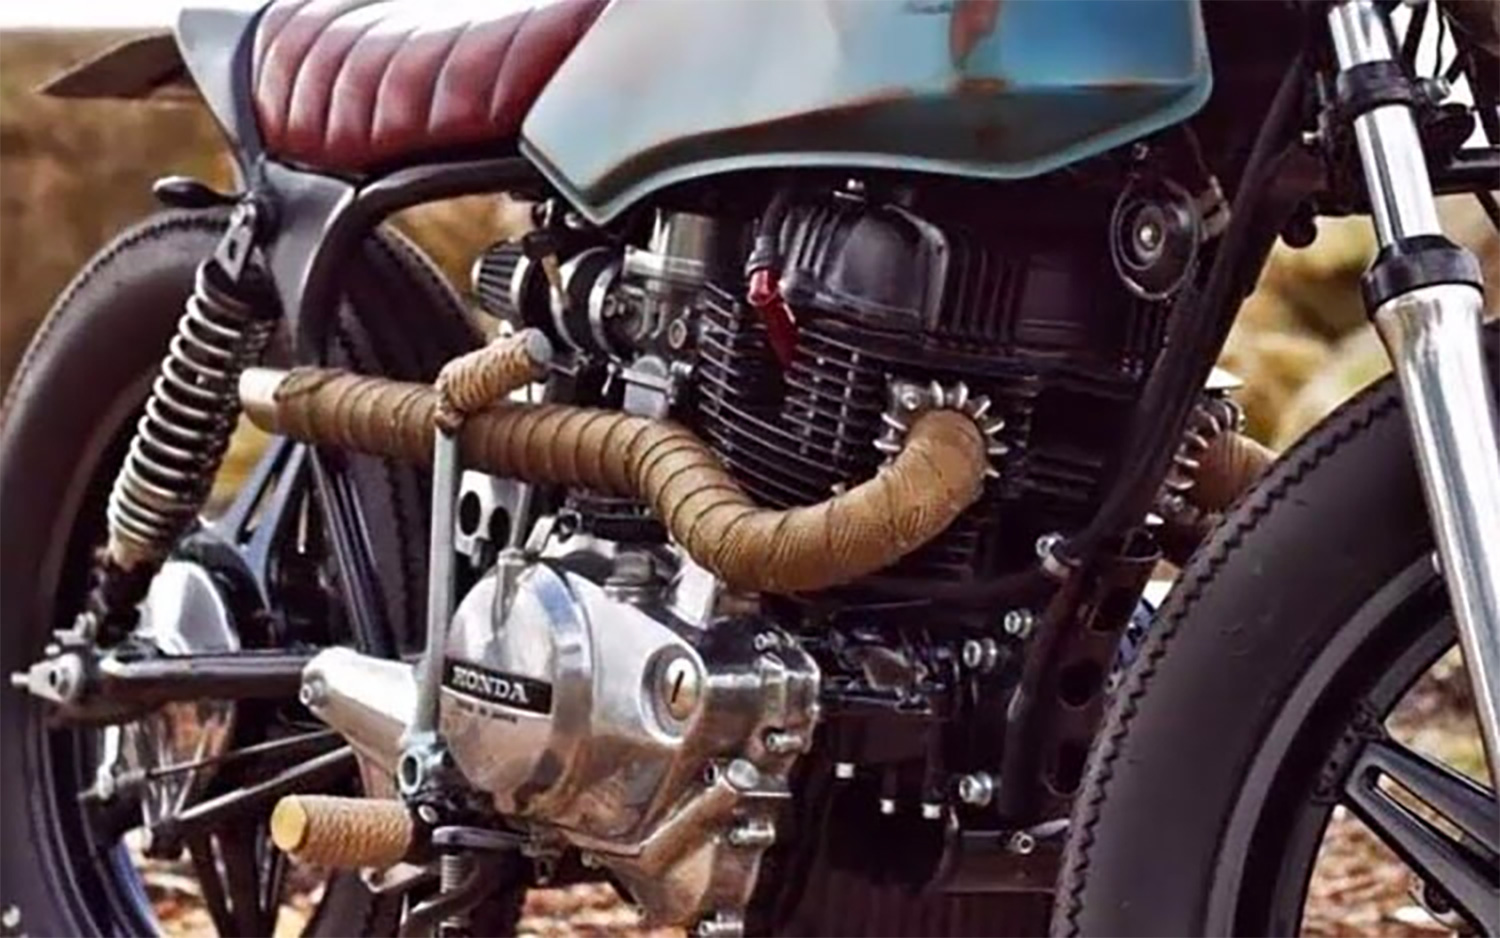 Exhaust pipes with pipe wrap on a Honda Custom Motorcycle